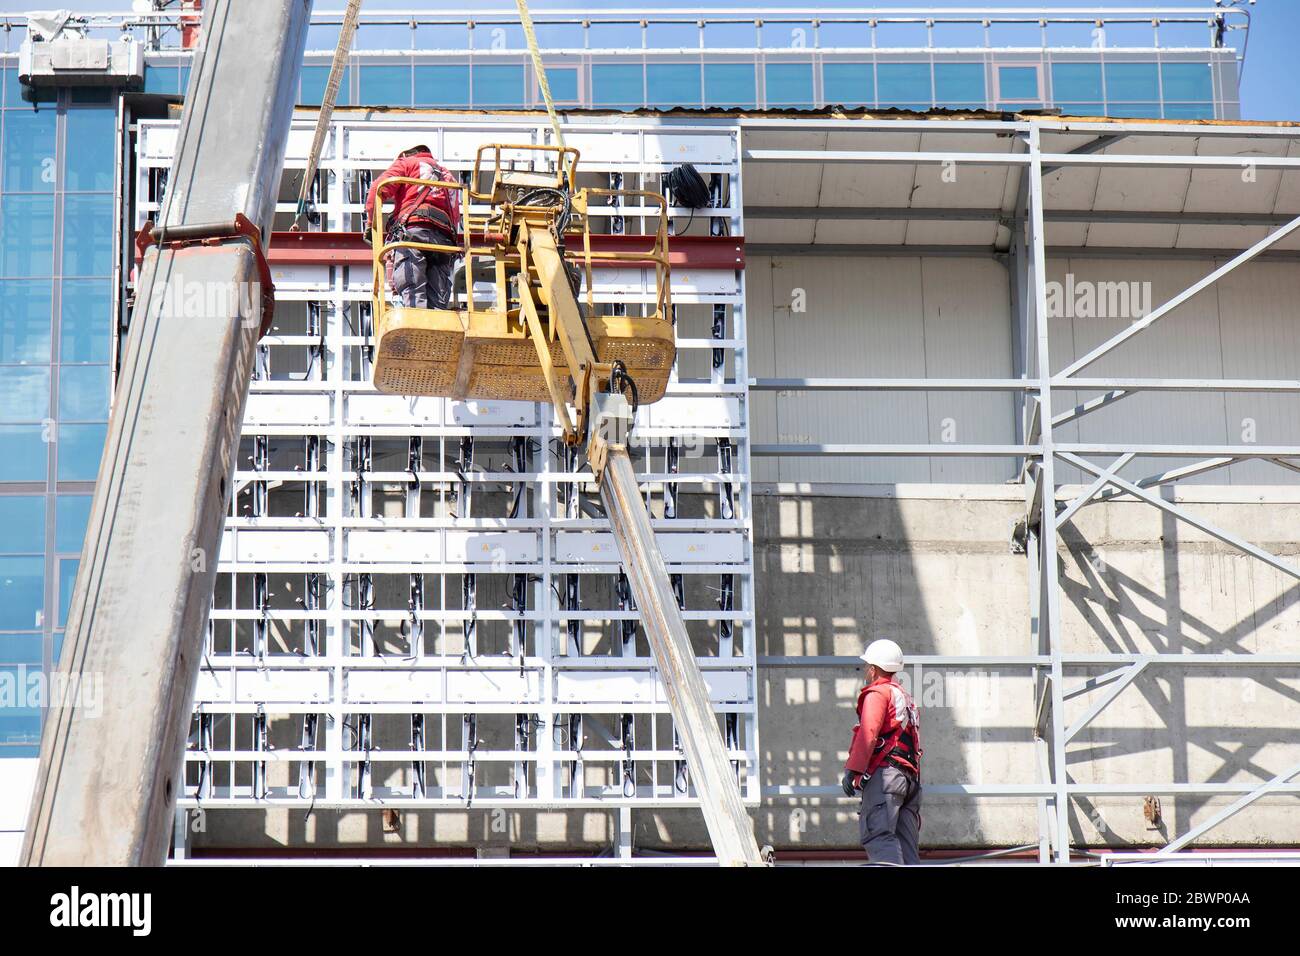 Belgrade, Serbia - May 6, 2020: Construction workers in crane basket installing external cladding metal structure on a building facade wall Stock Photo